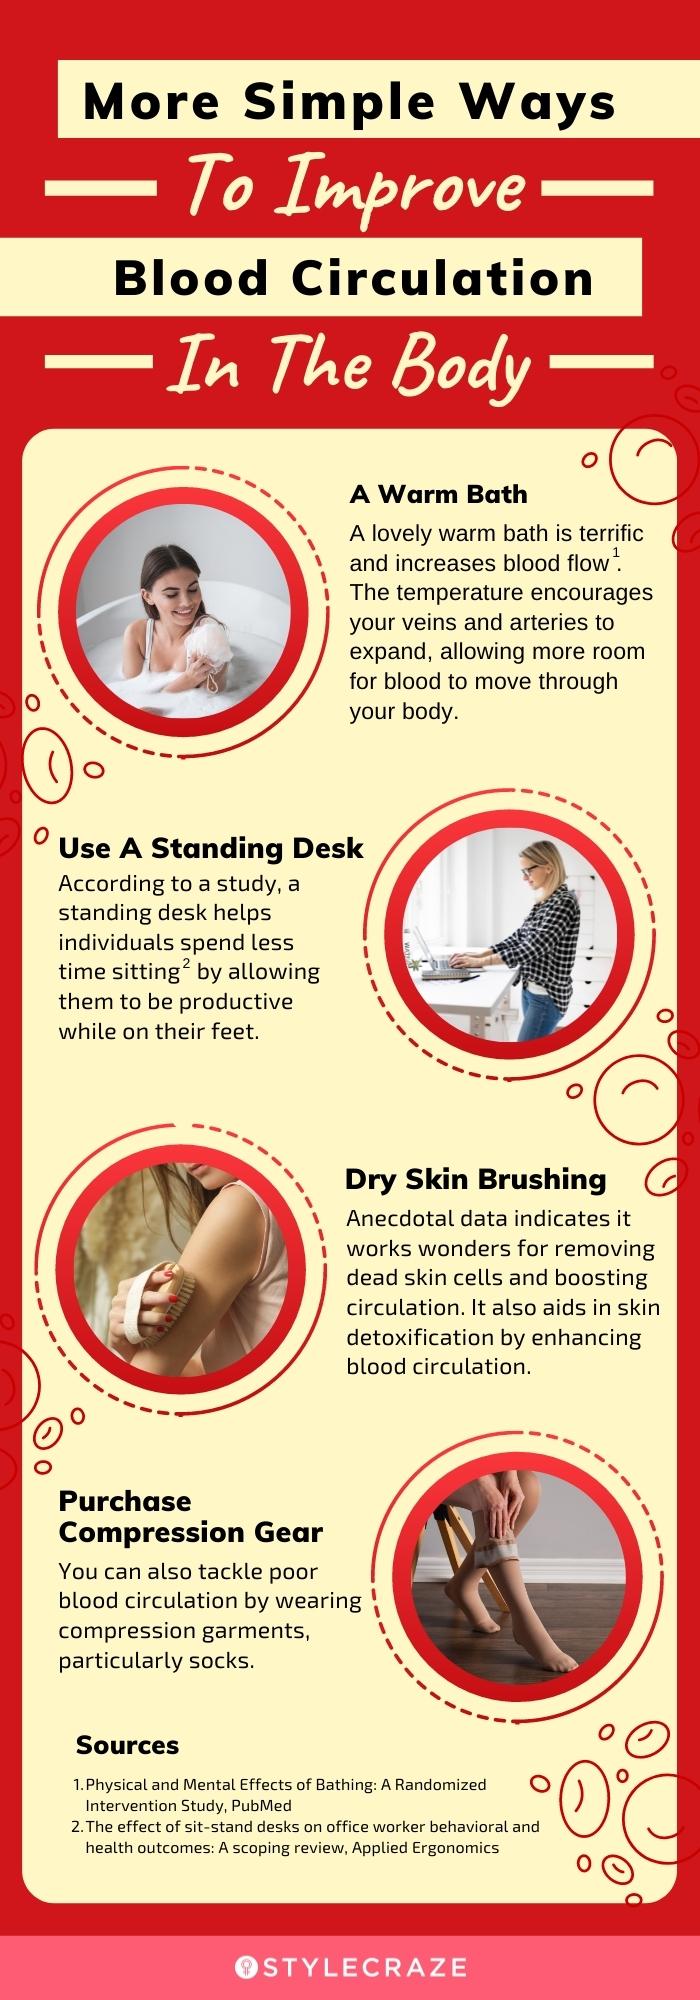 more simple ways to improve blood circulation in the body [infographic]